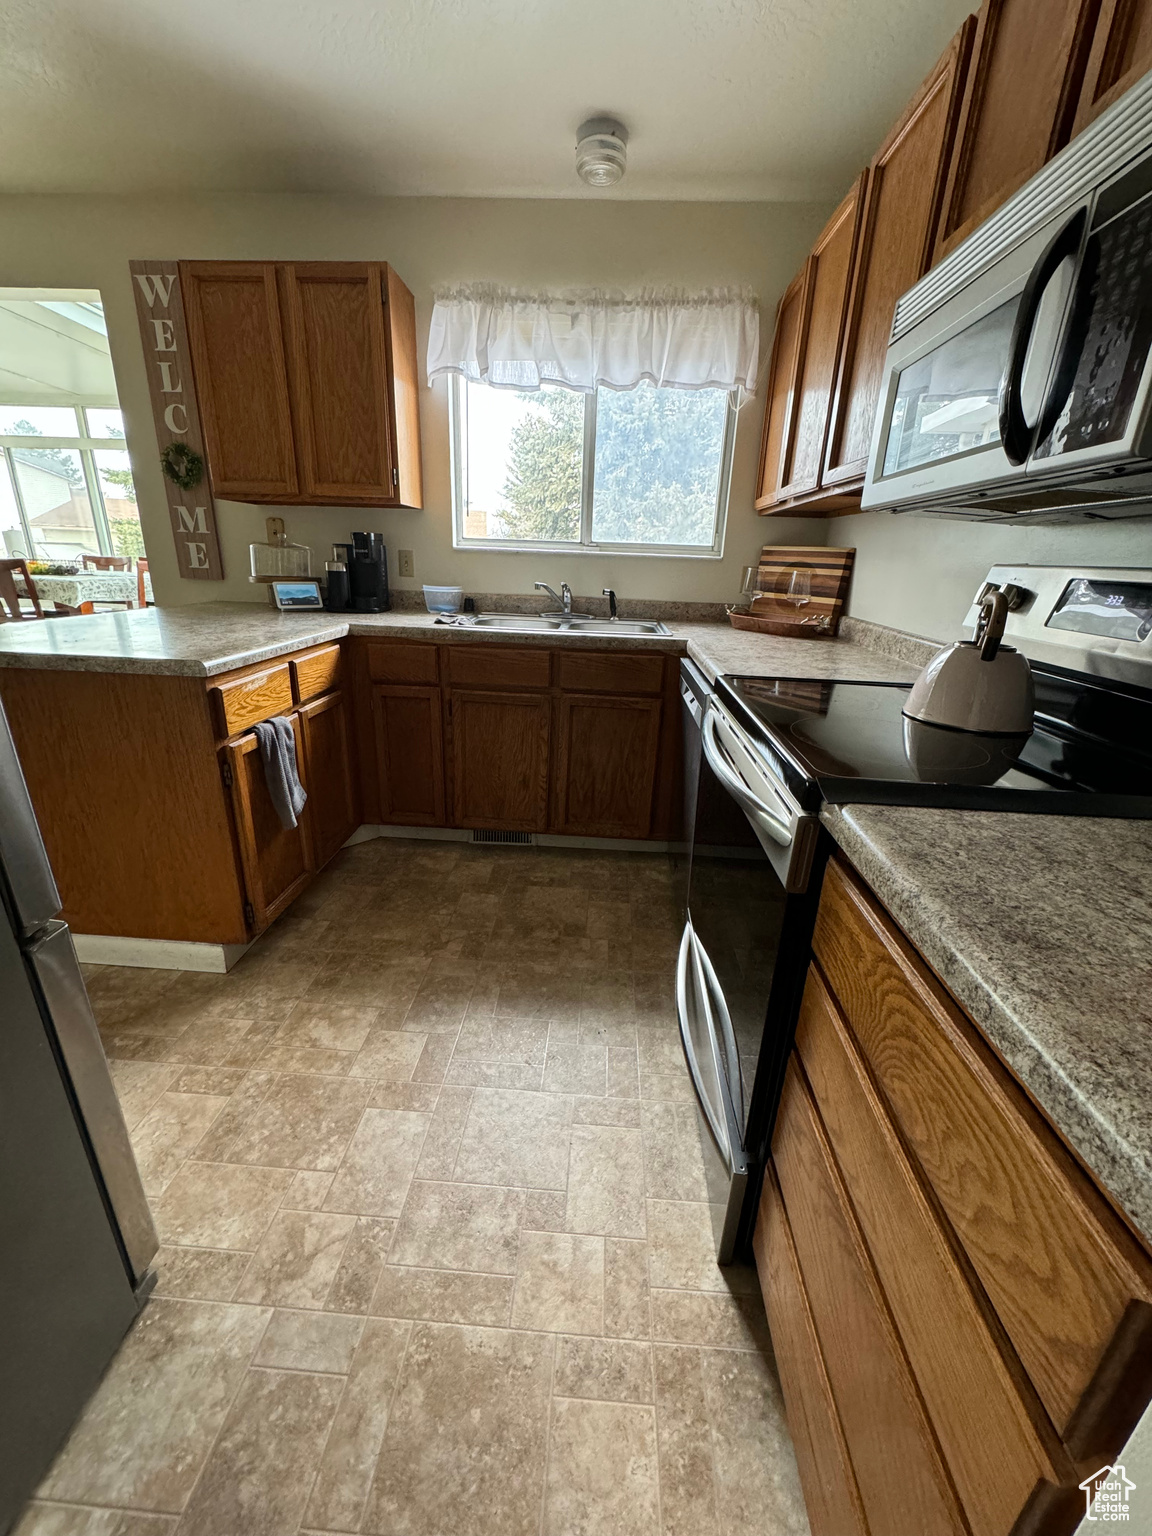 Kitchen with sink, appliances with stainless steel finishes, and light tile floors